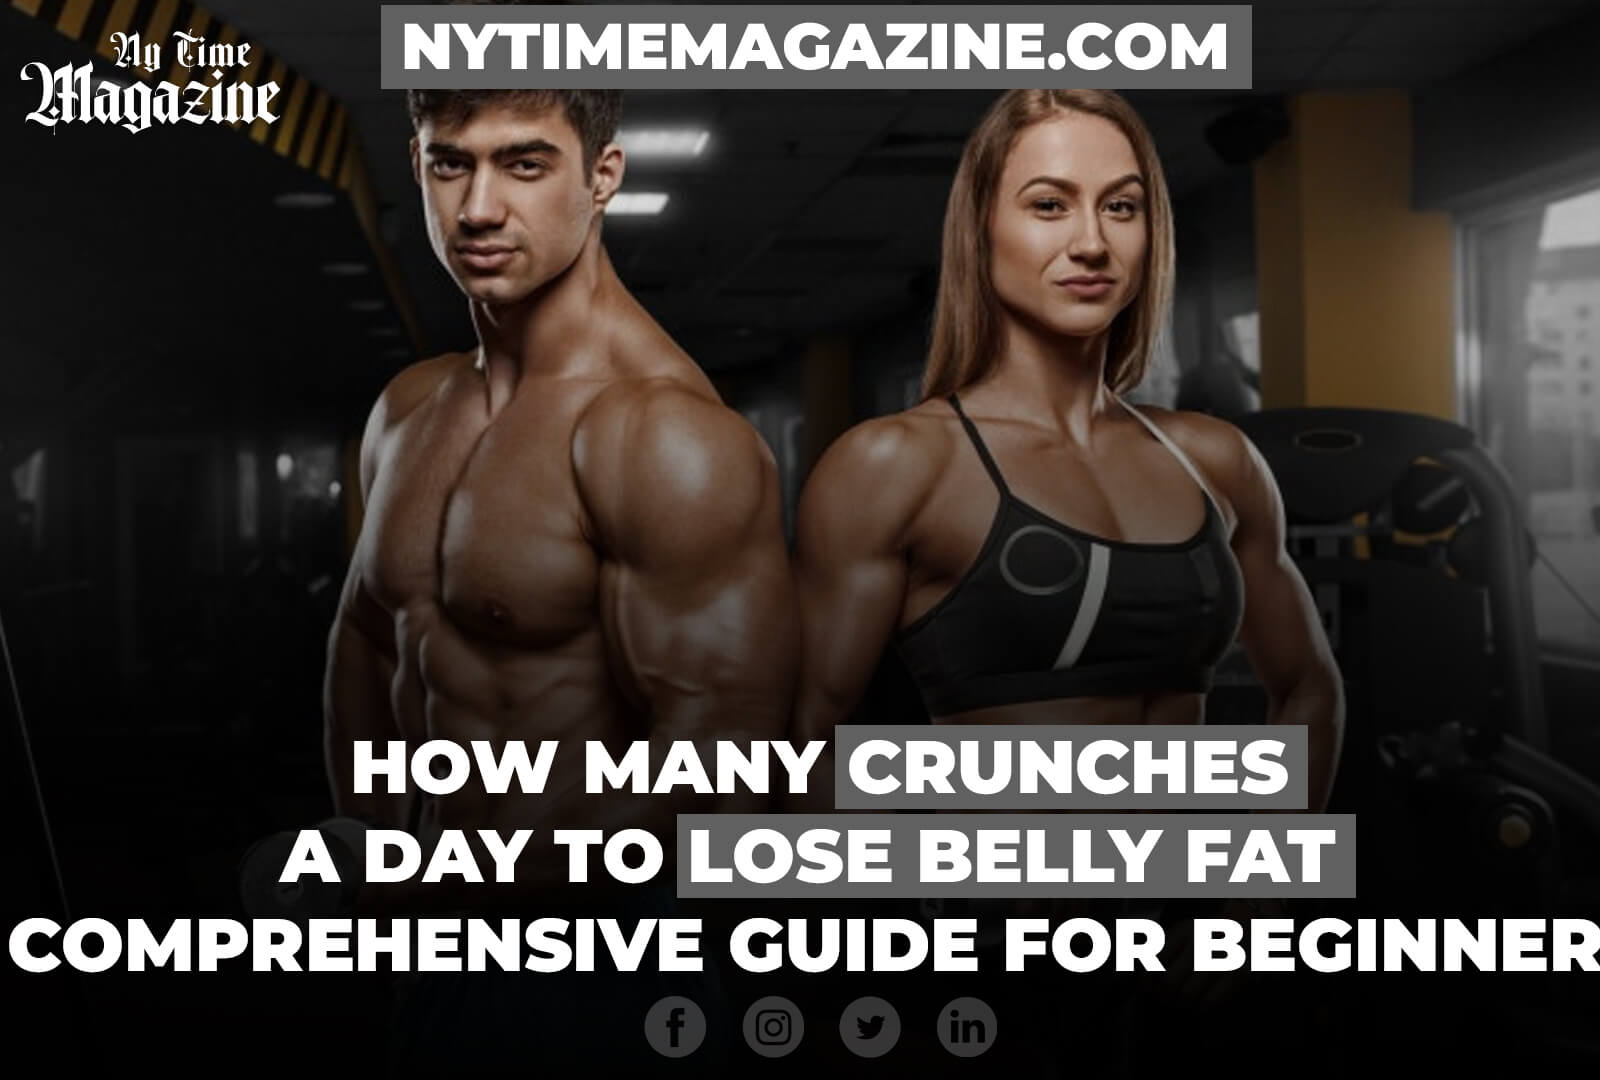 HOW MANY CRUNCHES A DAY TO LOSE BELLY FAT: A COMPREHENSIVE GUIDE FOR BEGINNERS